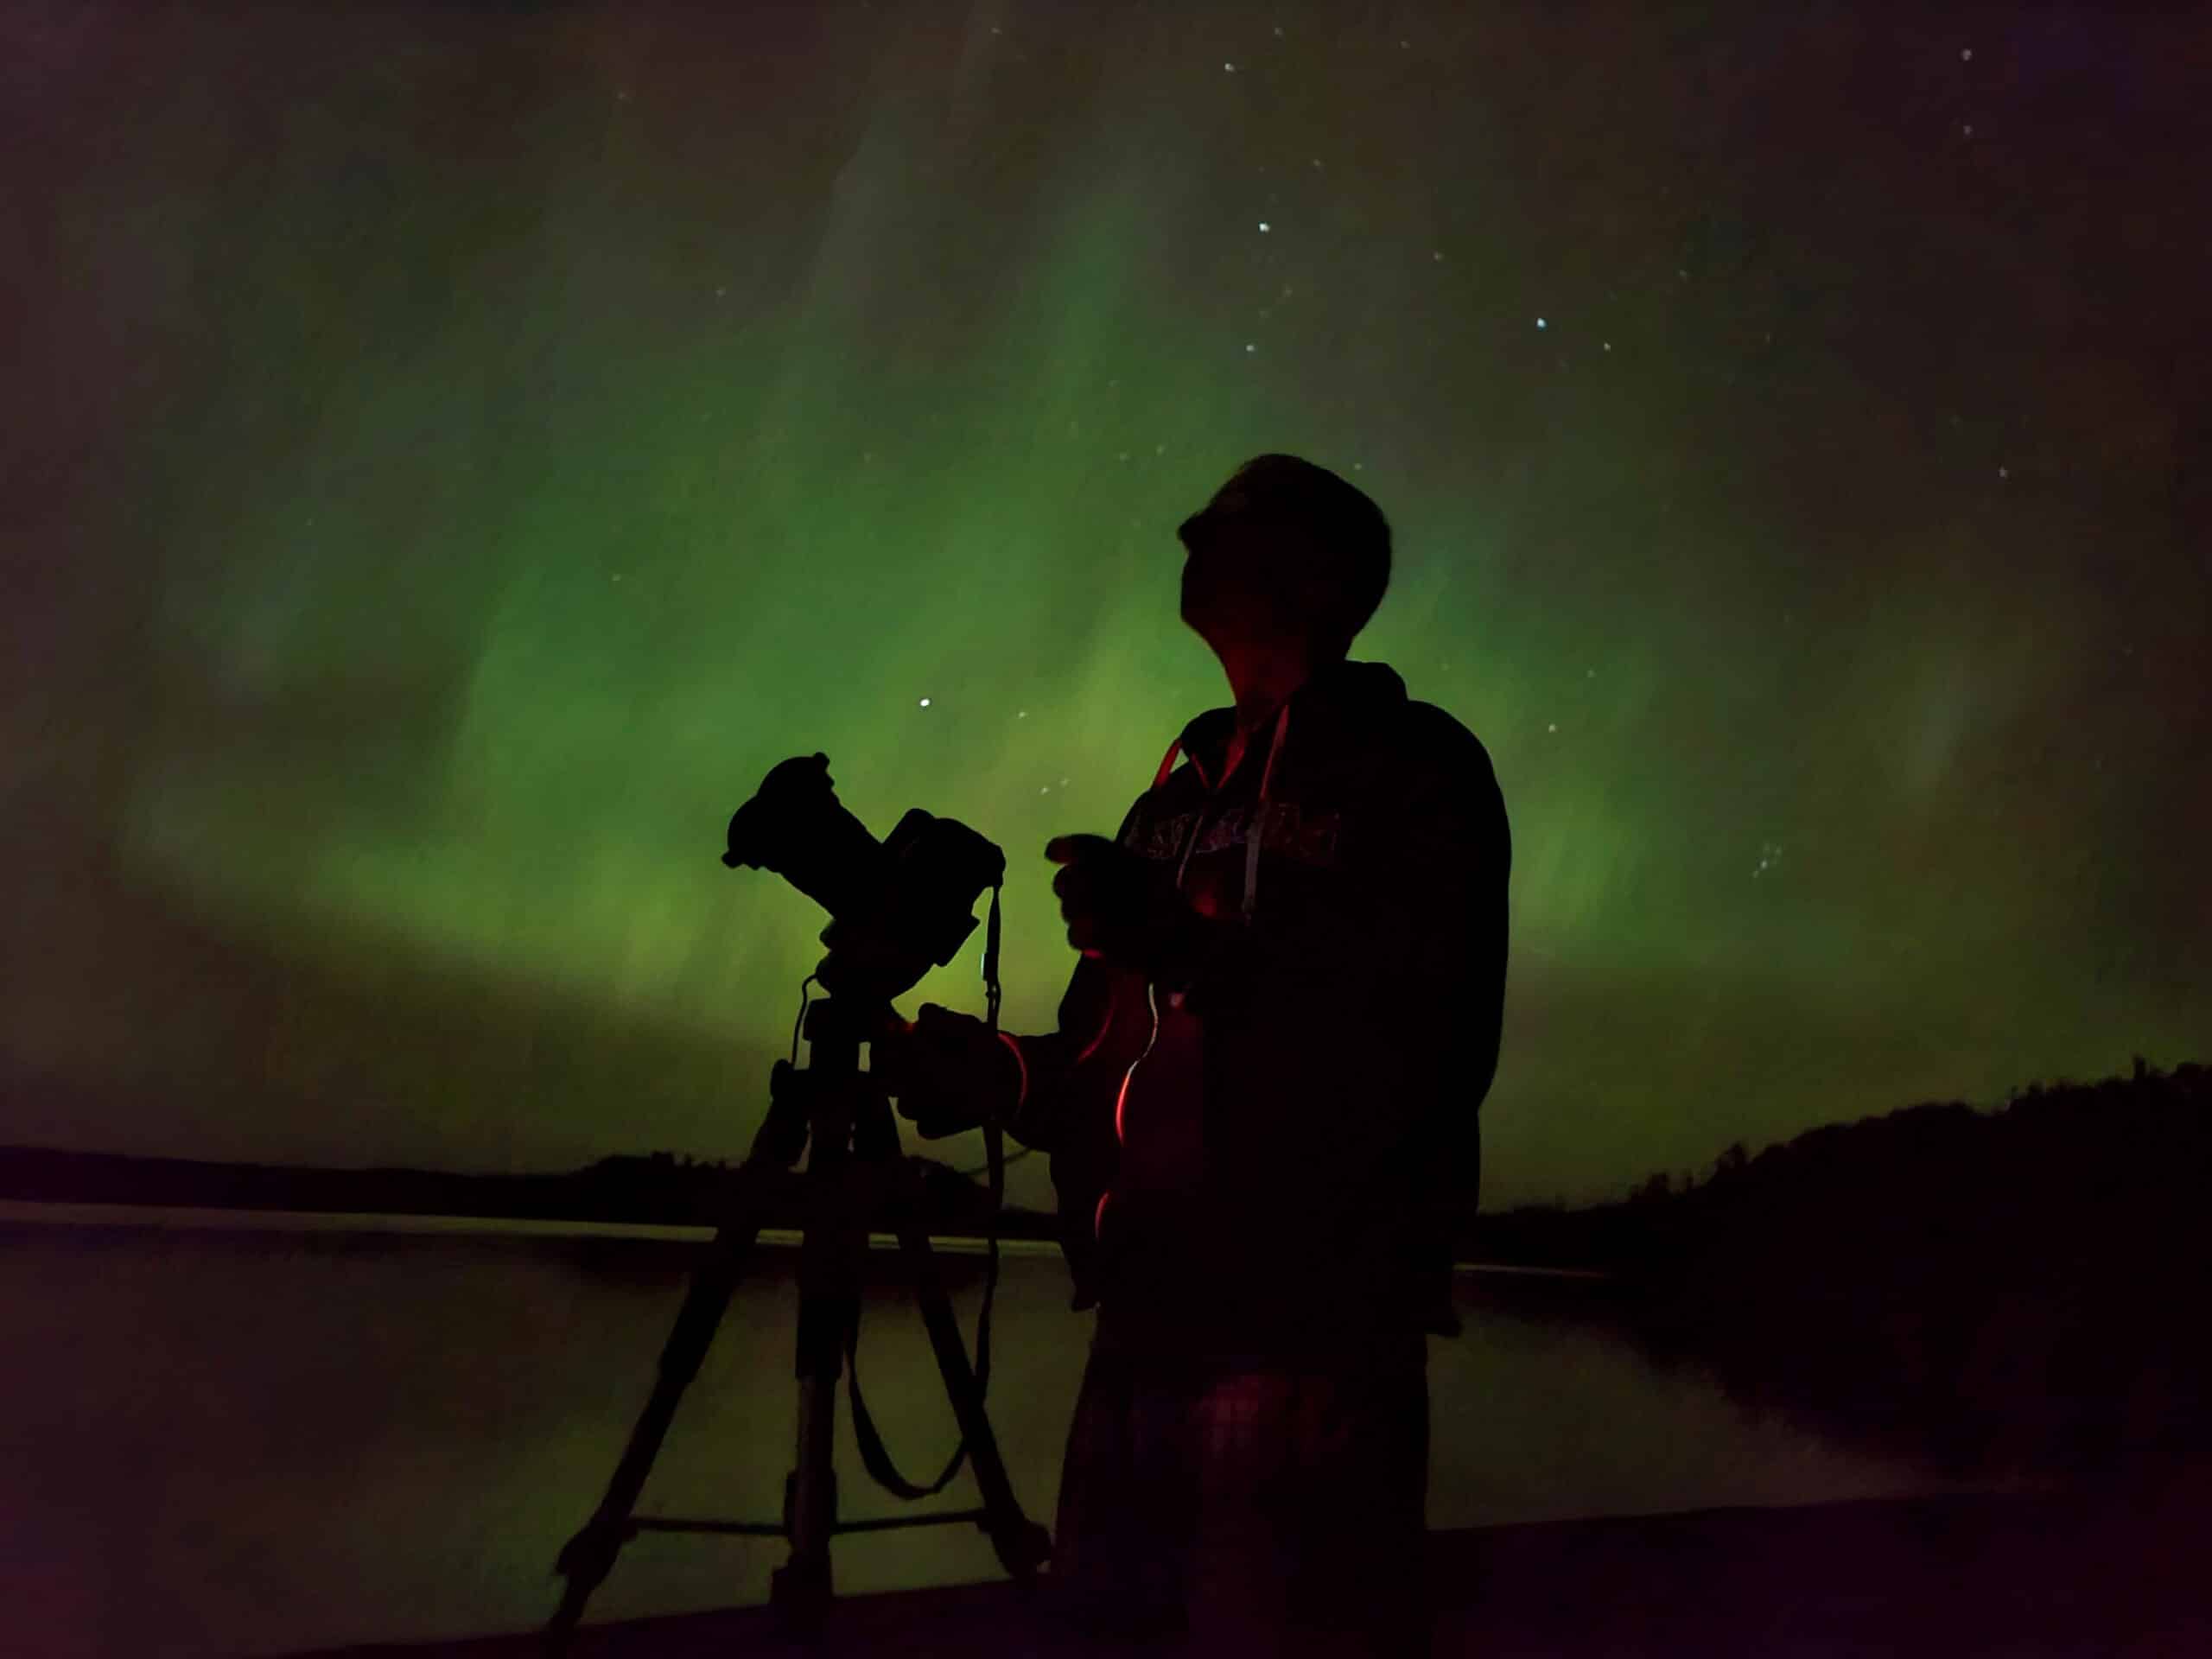 The silhouette of a man with a camera, with the aurora borealis behind him.